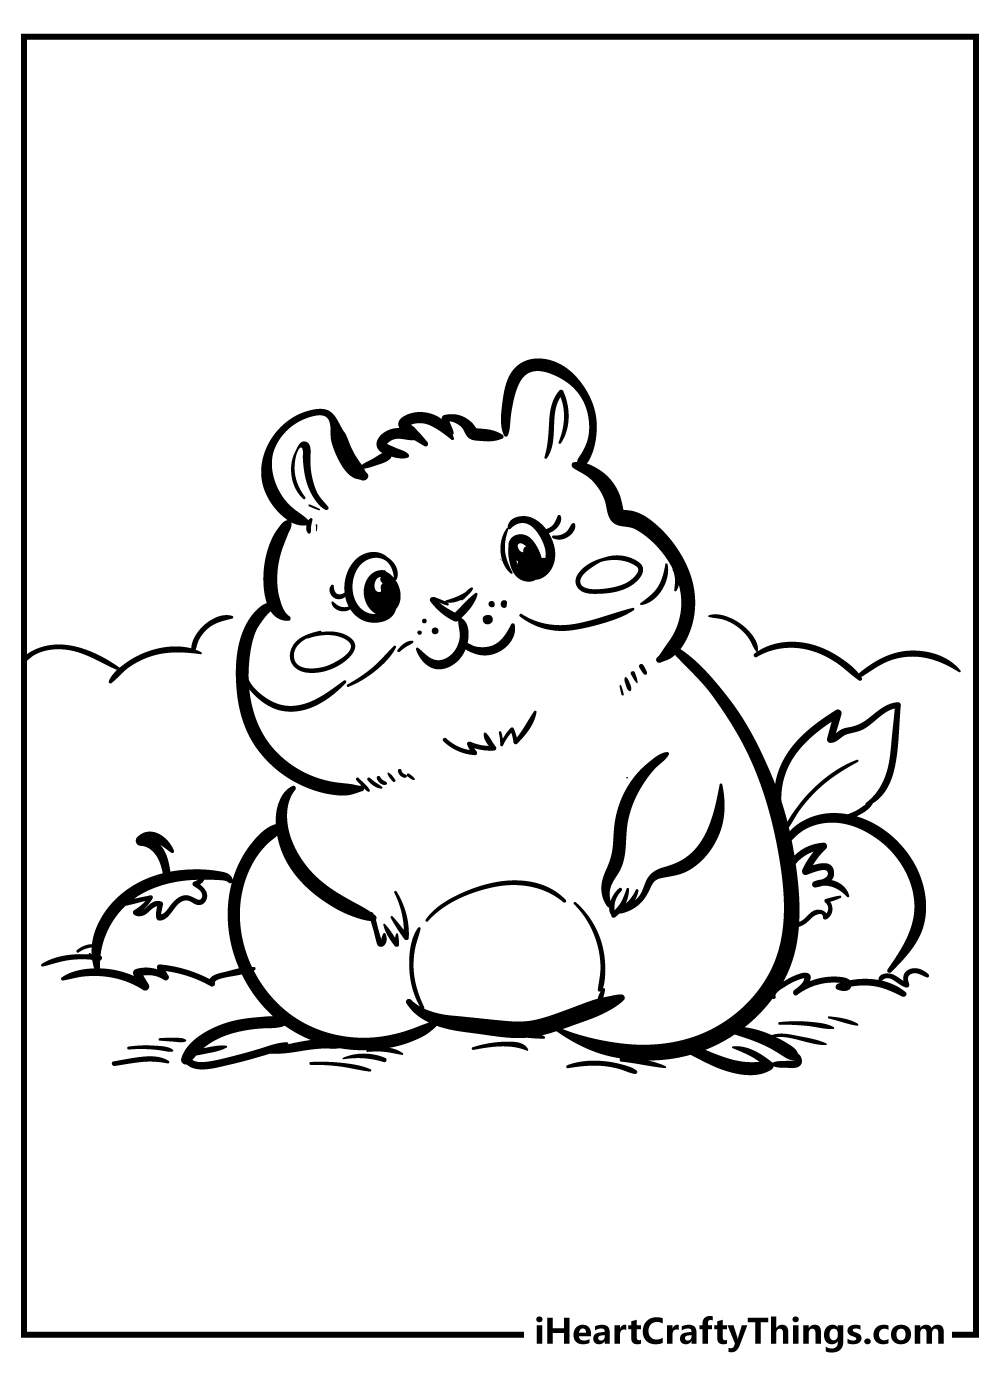 Hamster Coloring Book for adults free download